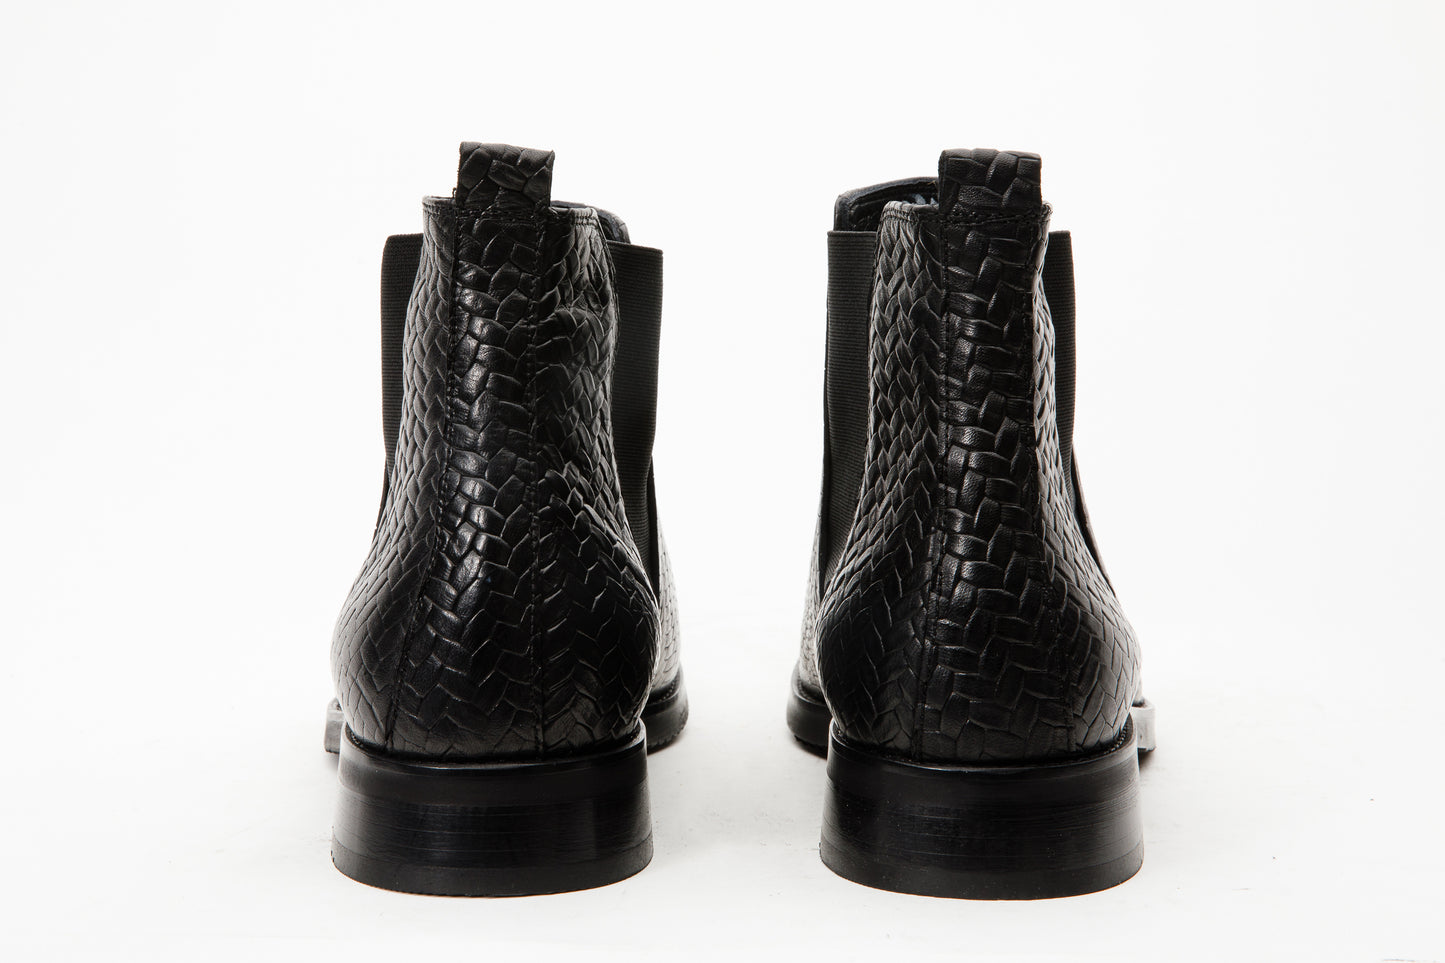 The Oslo Black Leather Chelsea Men Boot